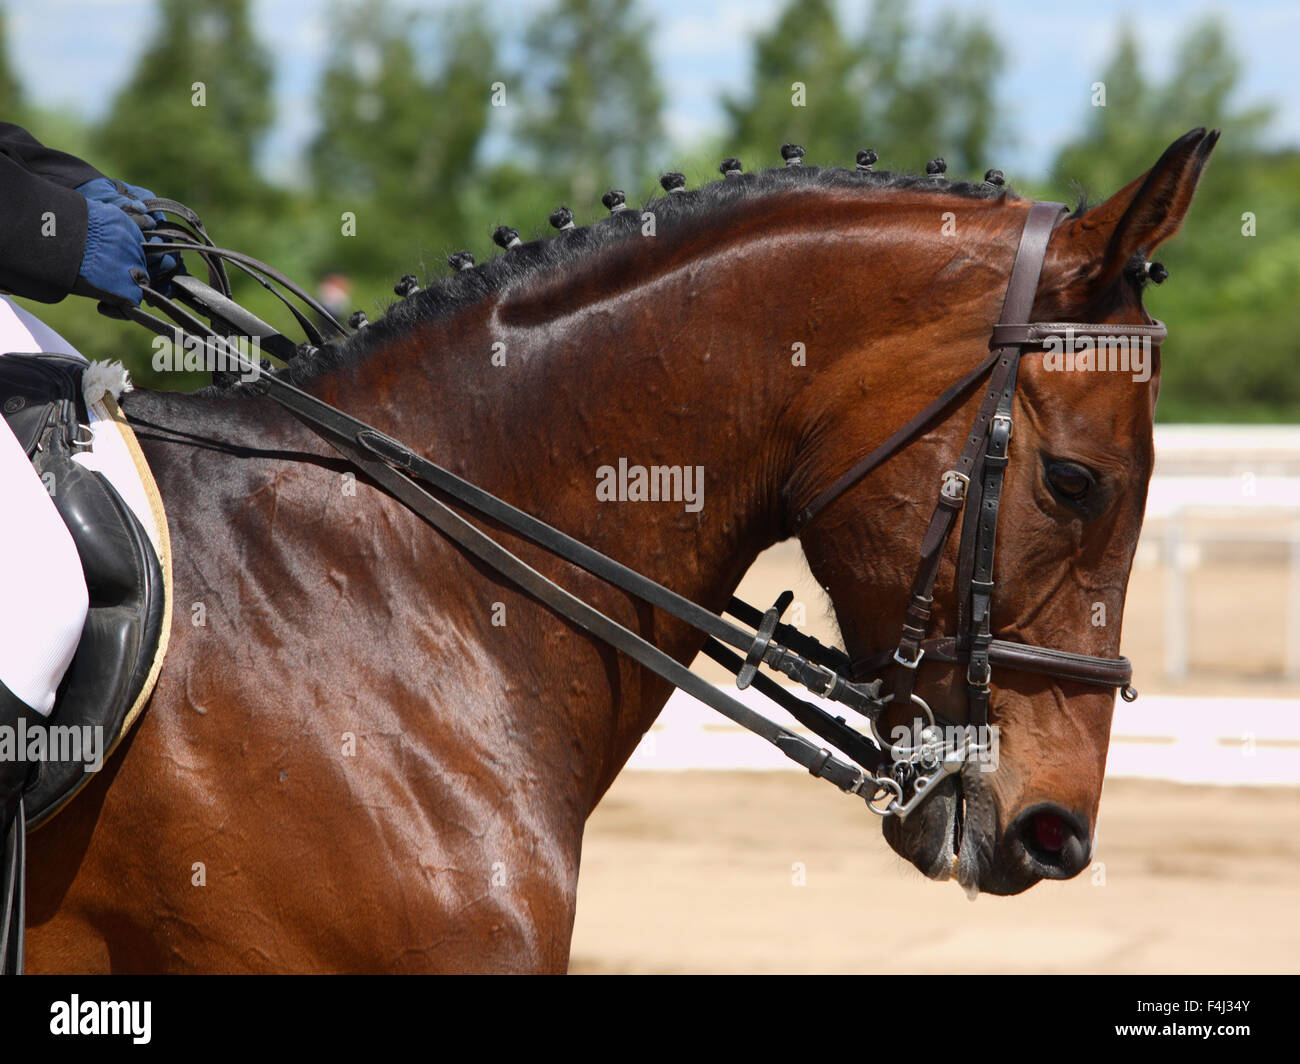 Amazing horse head with bridle on sports arena background Stock Photo